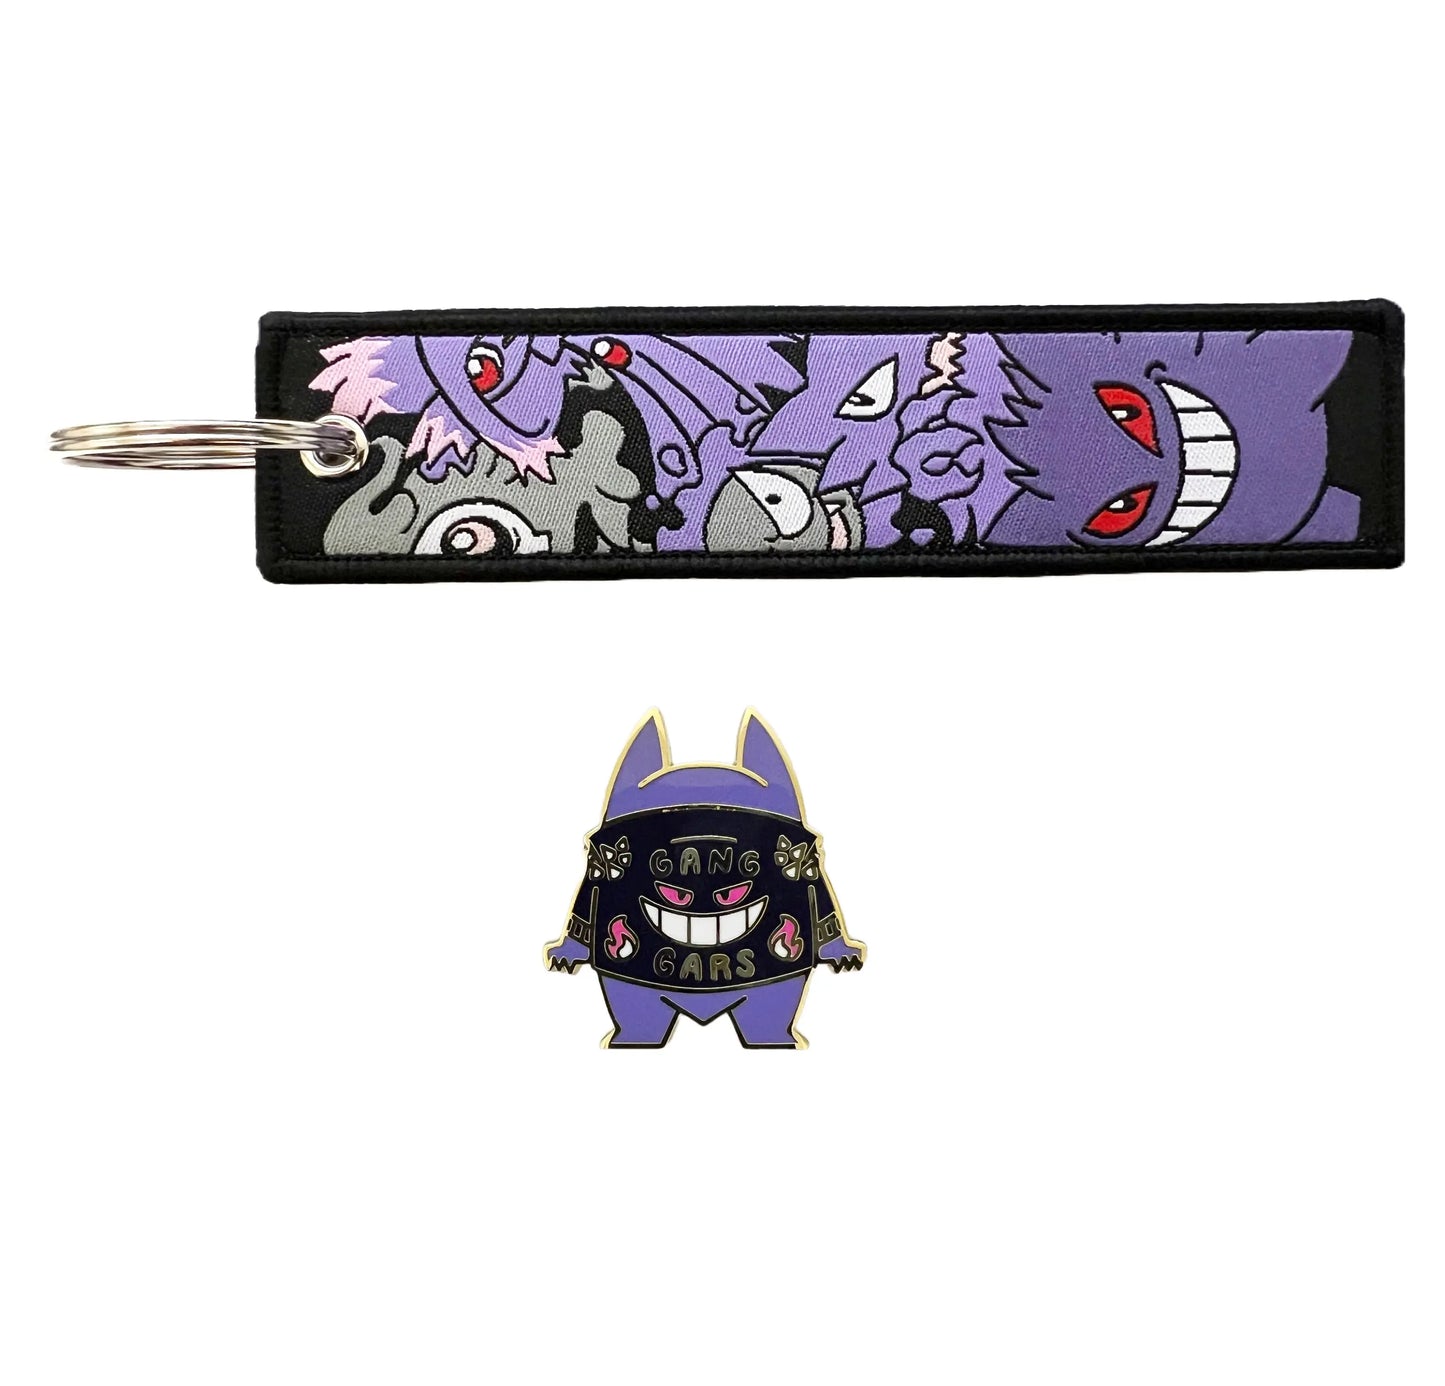 Pokemon Gengar Character Themed Set of One Embroidered Fabric Keychain and One Enamel Metal Pin Badge